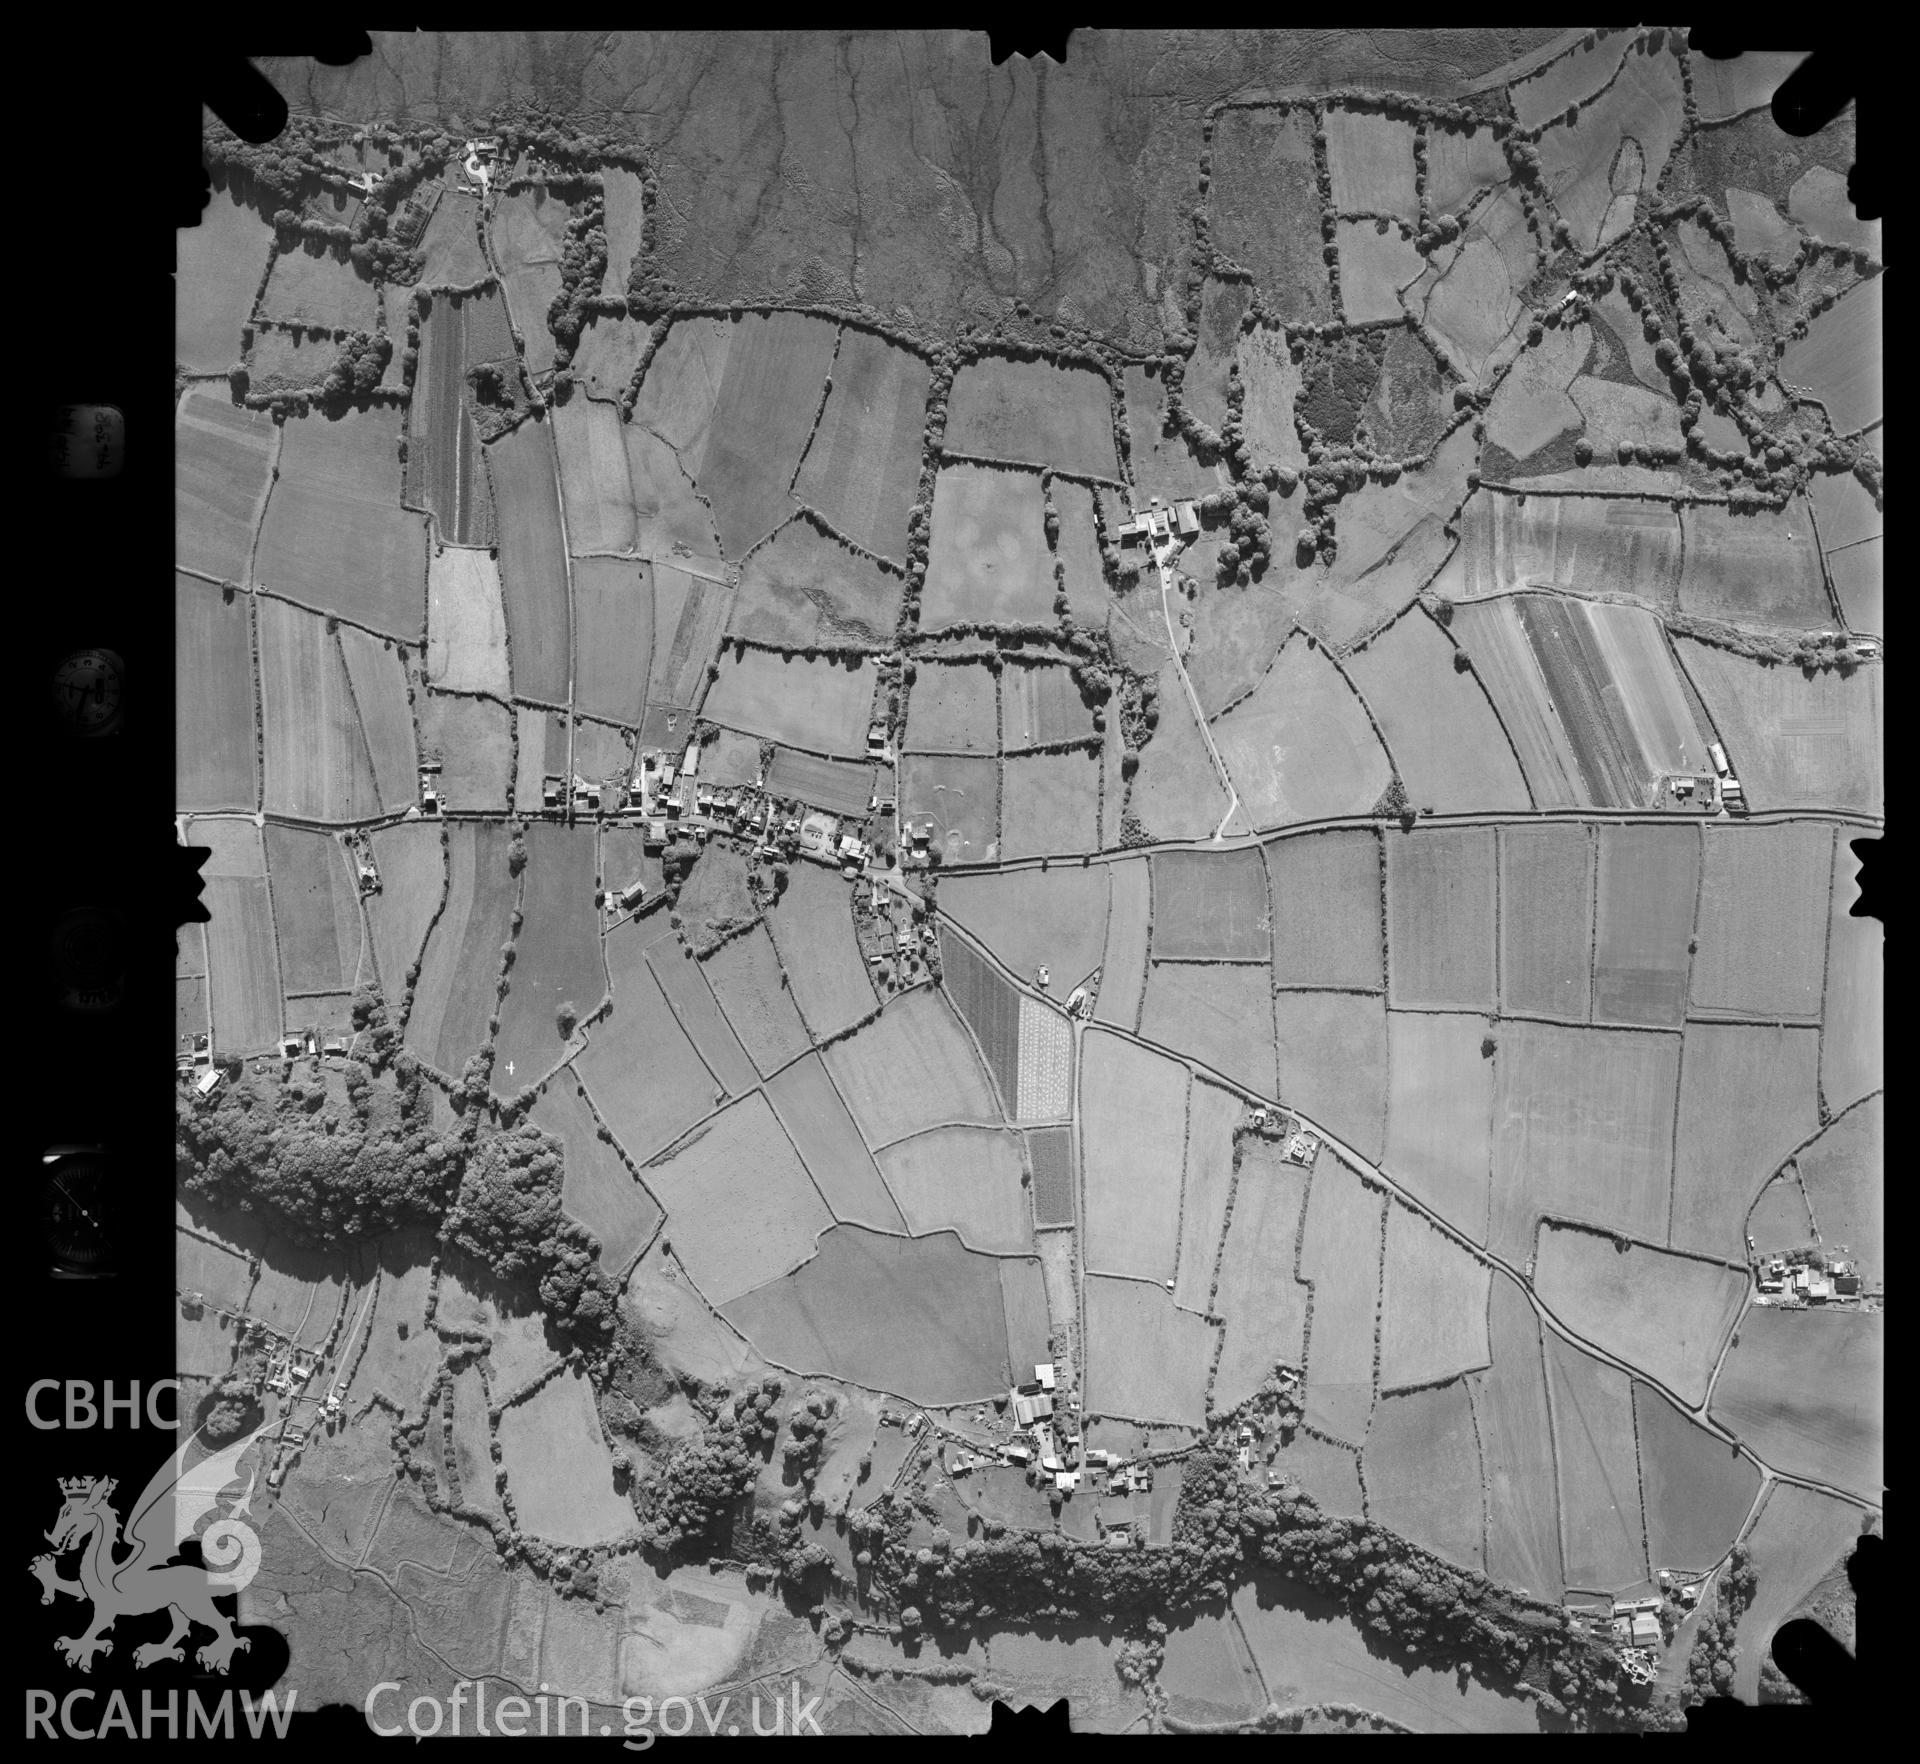 Digitized copy of an aerial photograph showing the Gower area, taken by Ordnance Survey, 1999.